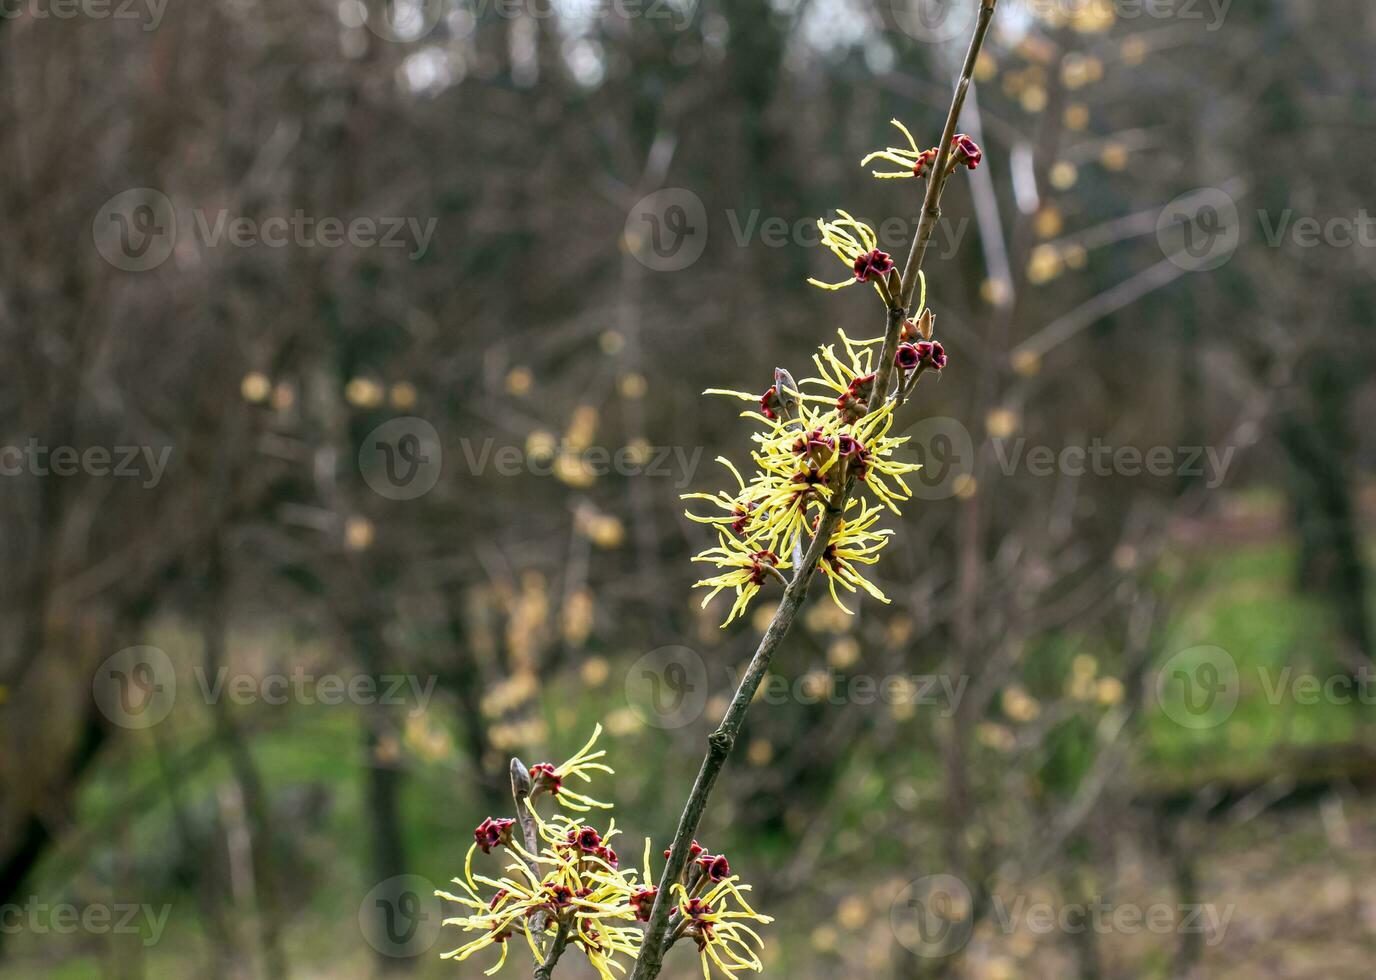 Flower of Hazel Witch shrub, Hamamelis virginiana in early spring. Hamamelis has gorgeous yellow flowers in early spring. photo